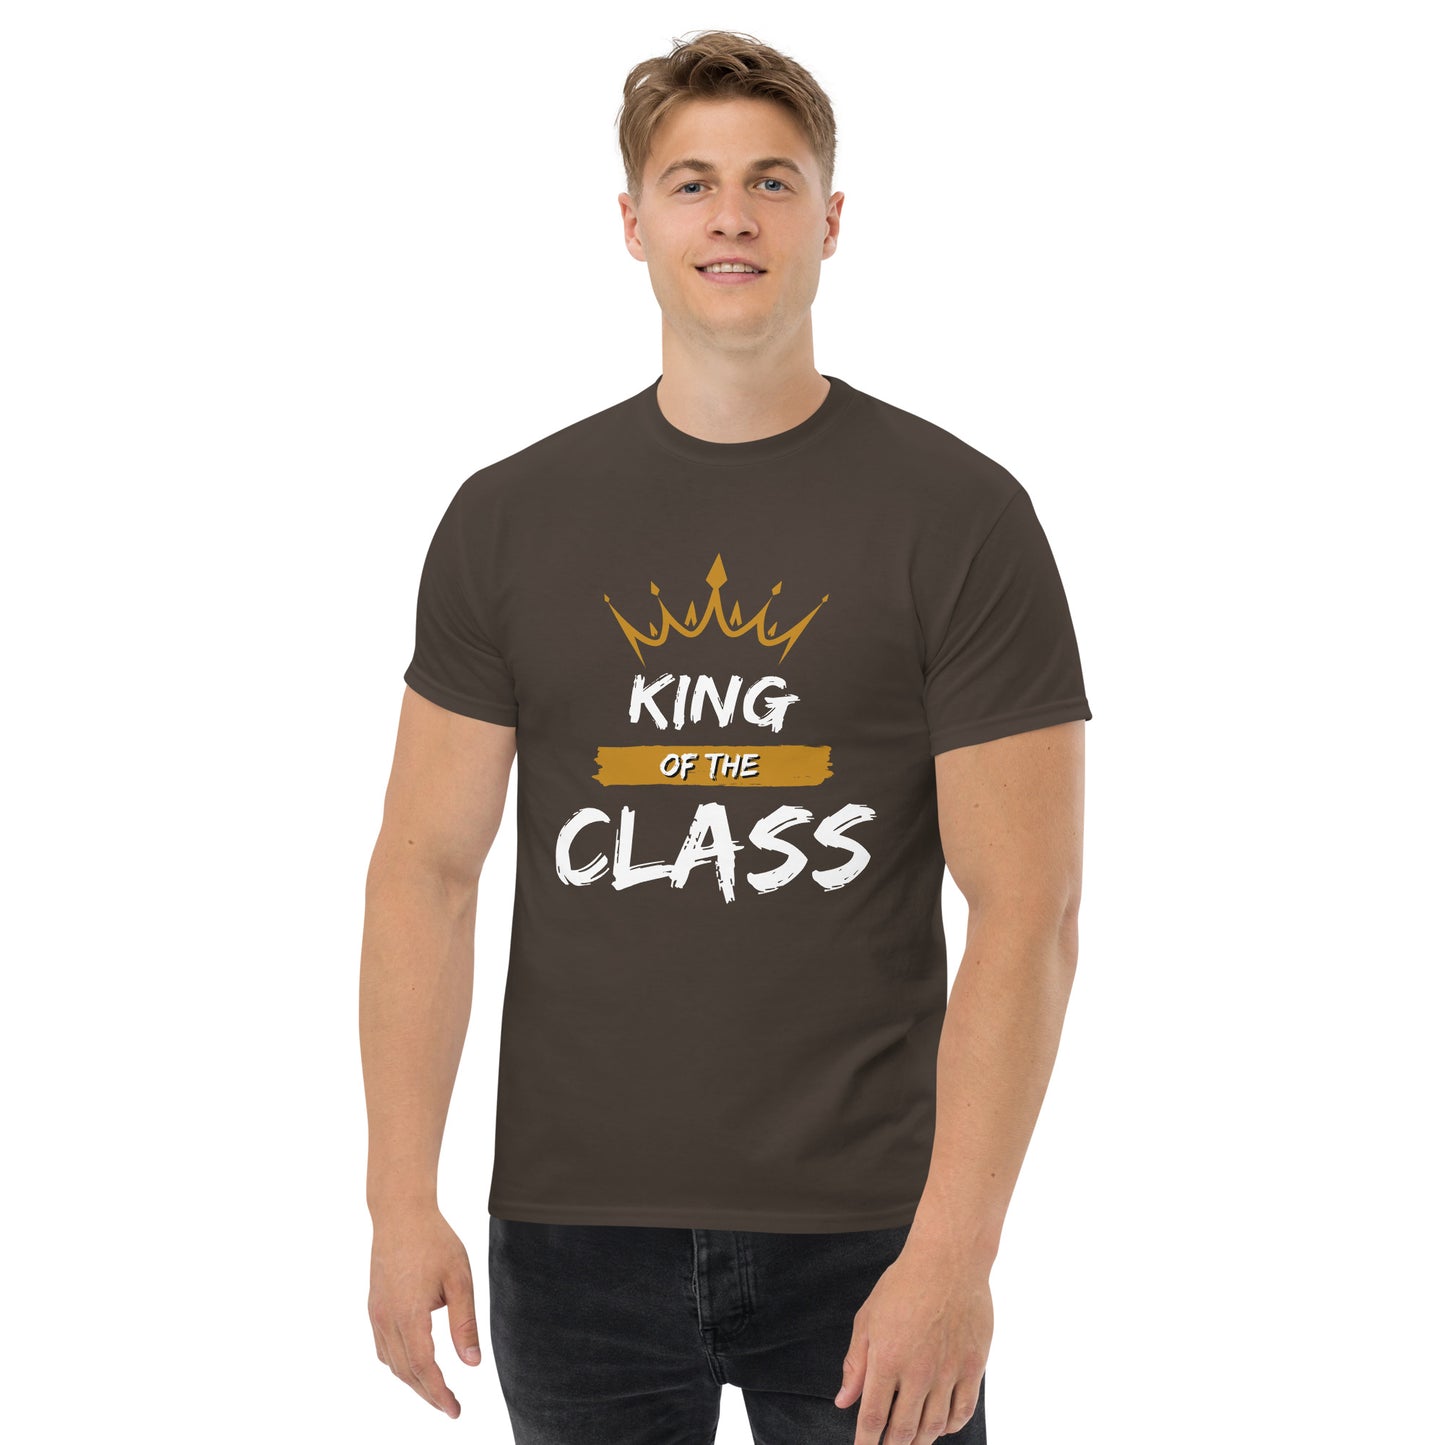 King of the Class